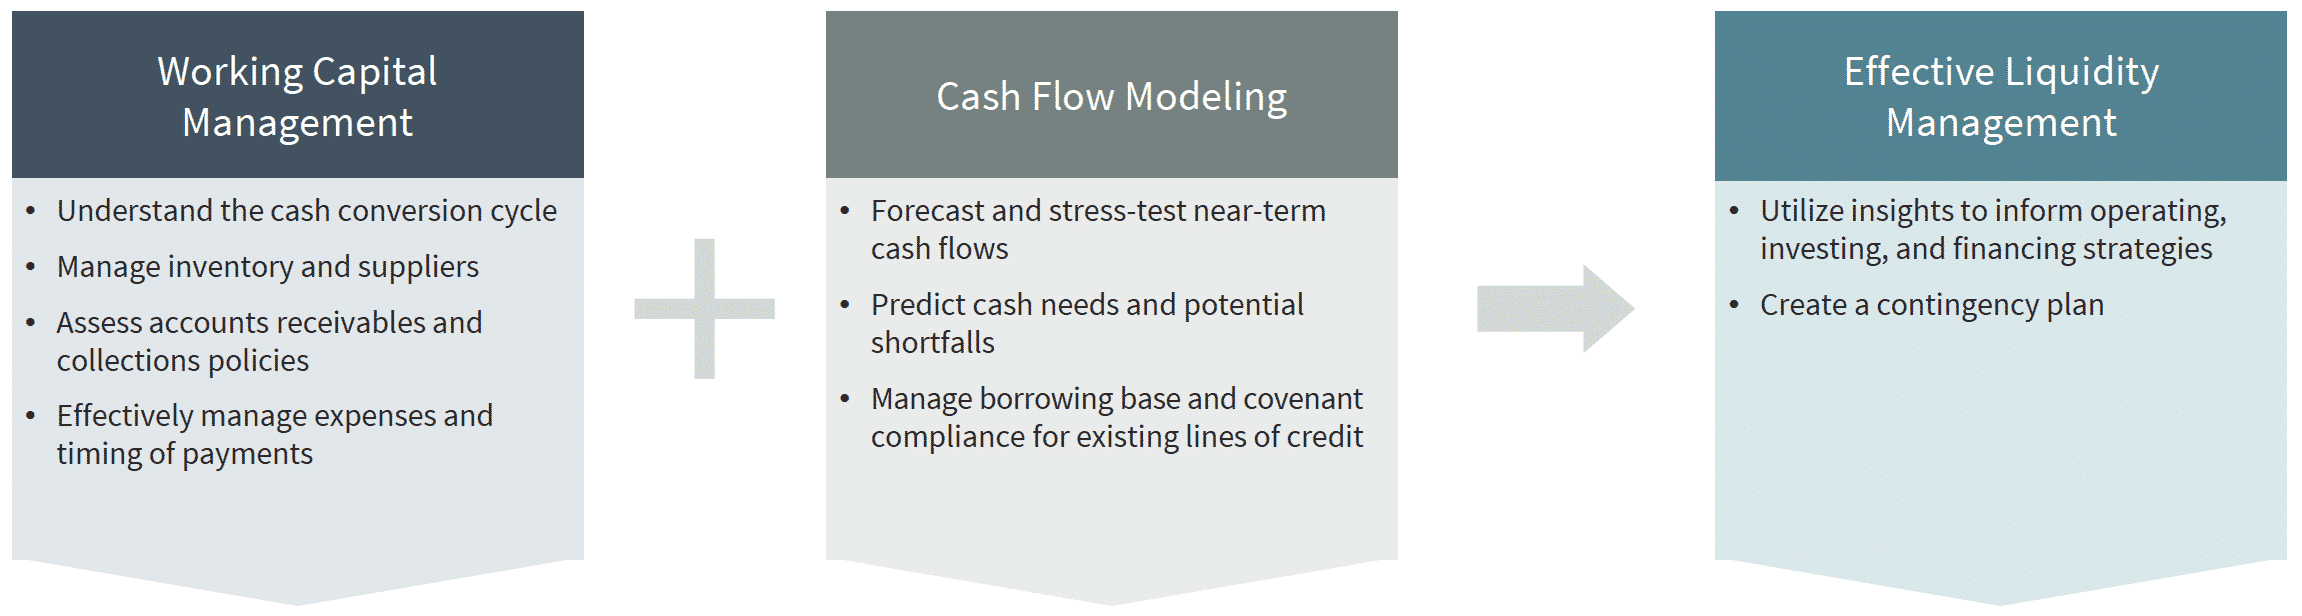 Working Capital Optimization and Cash Flow Planning